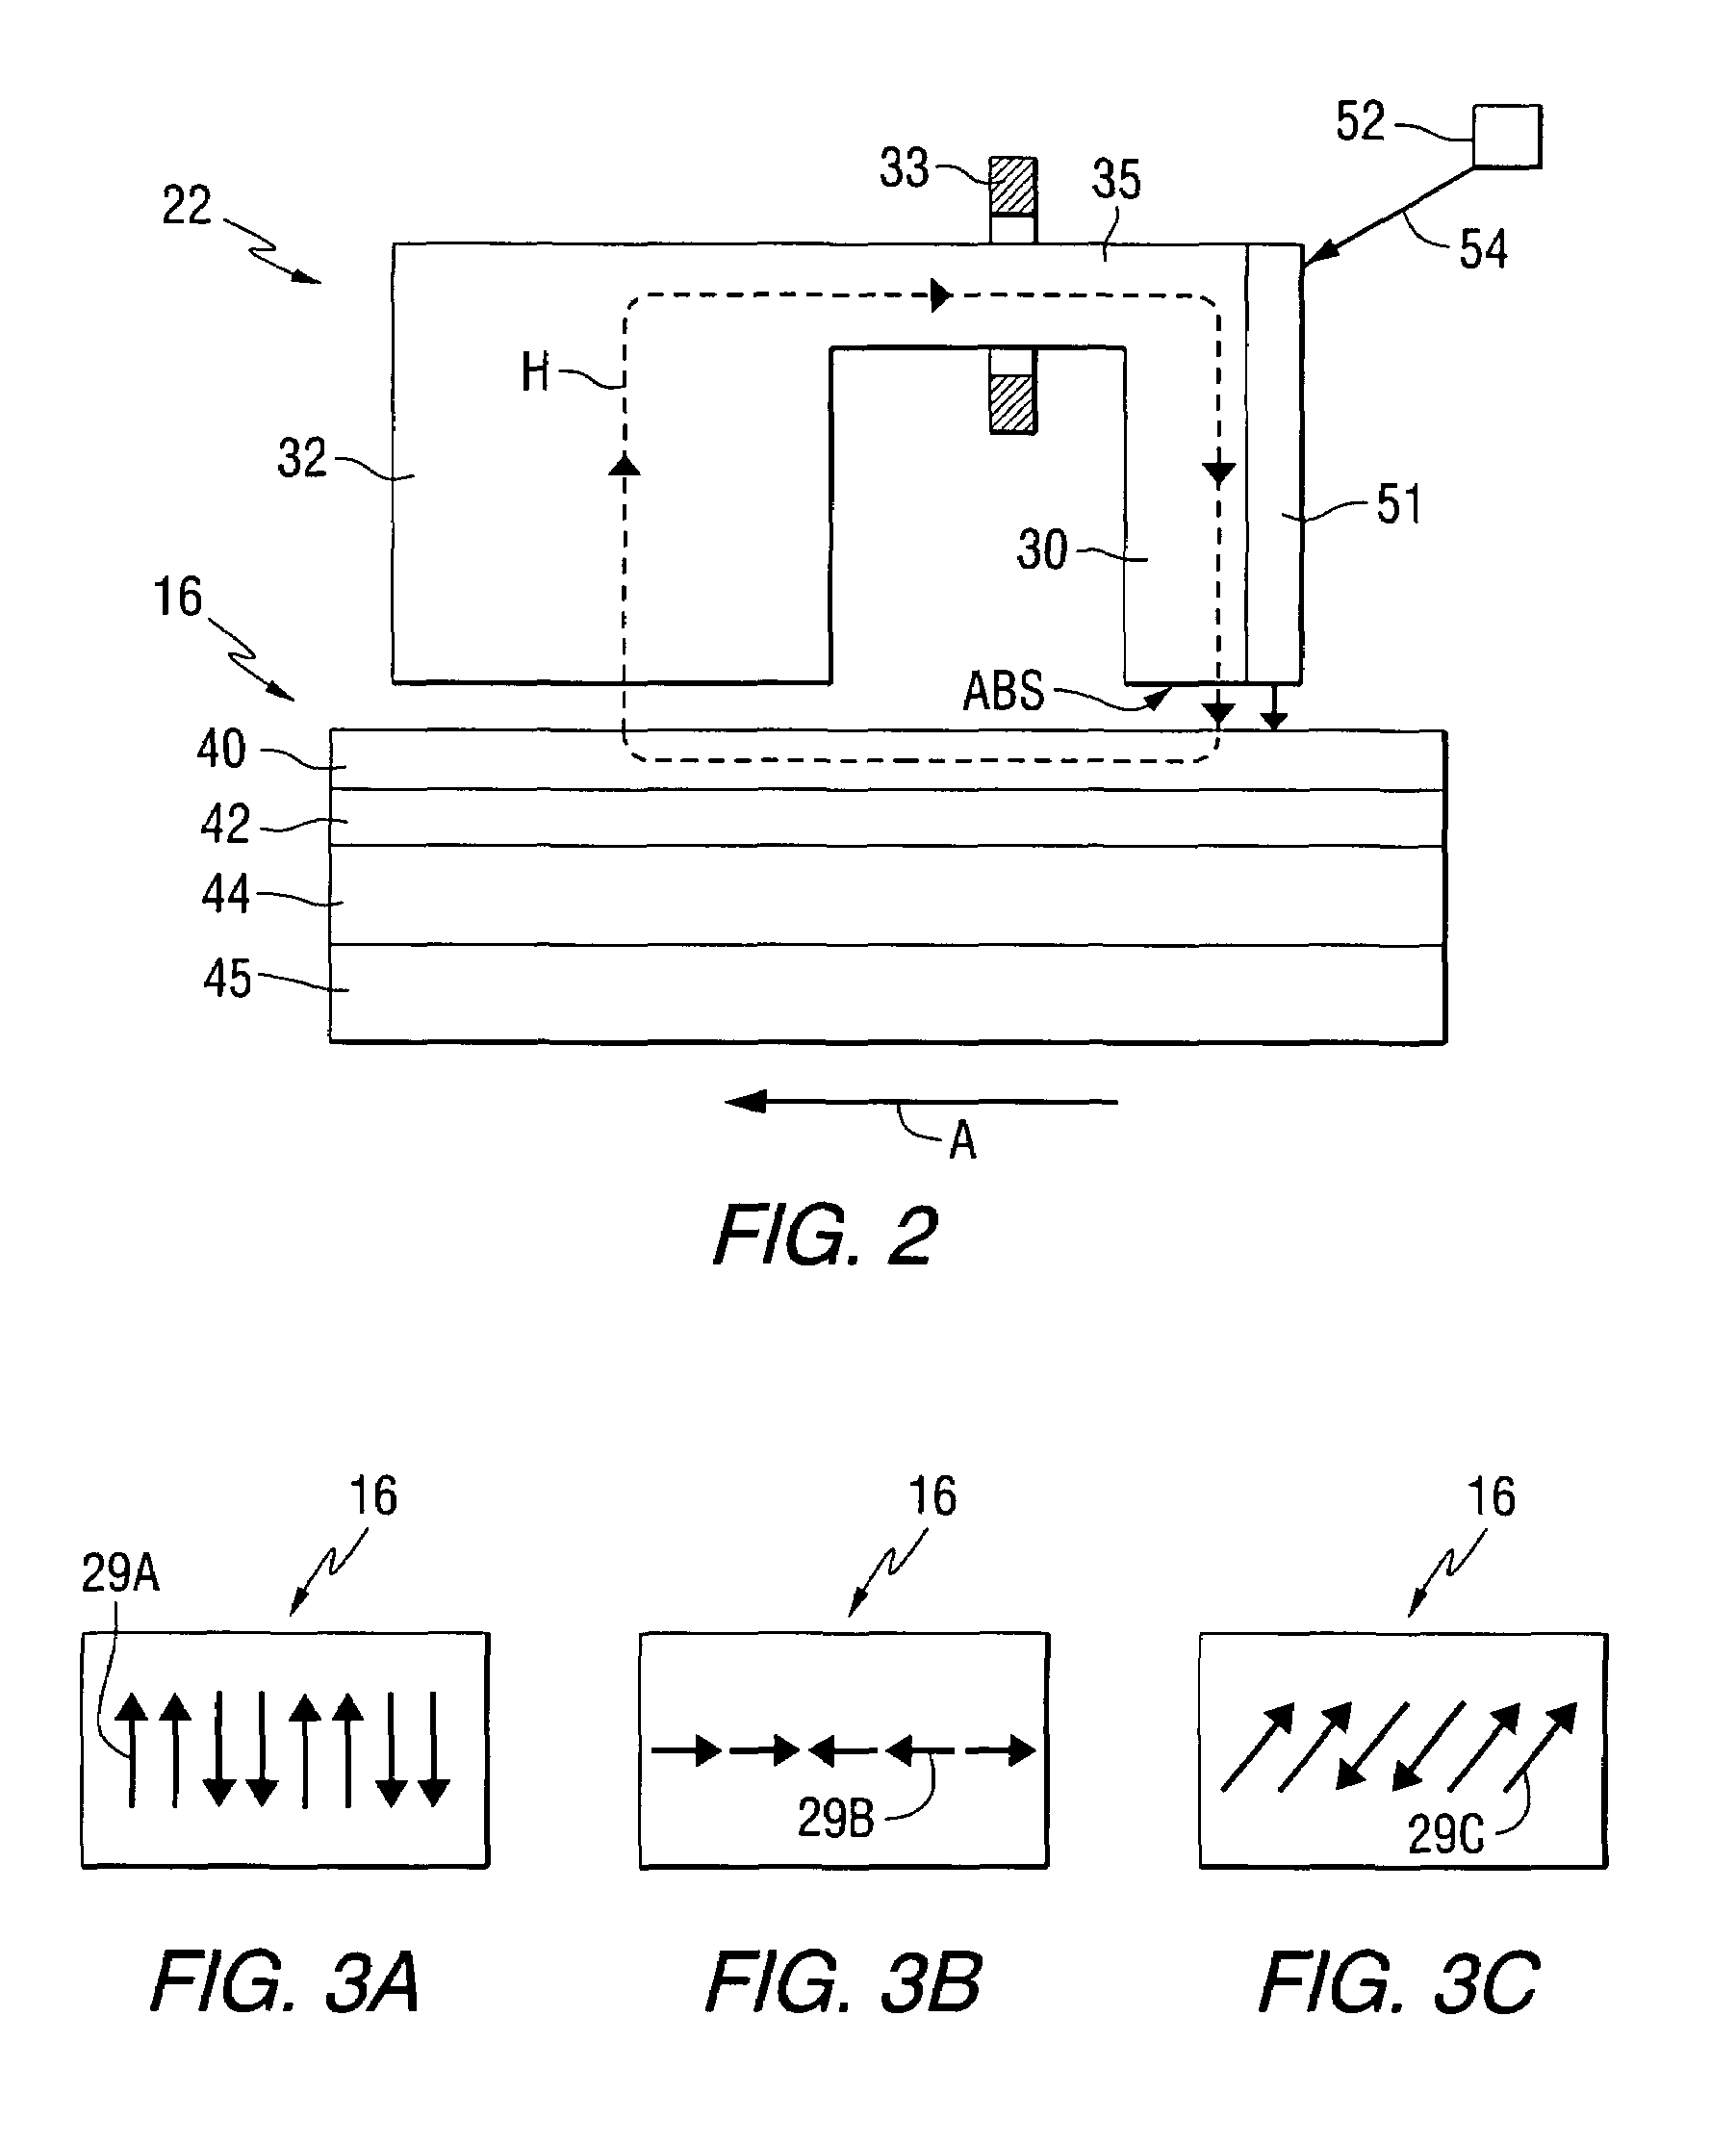 Thin film structure with controlled lateral thermal spreading in the thin film